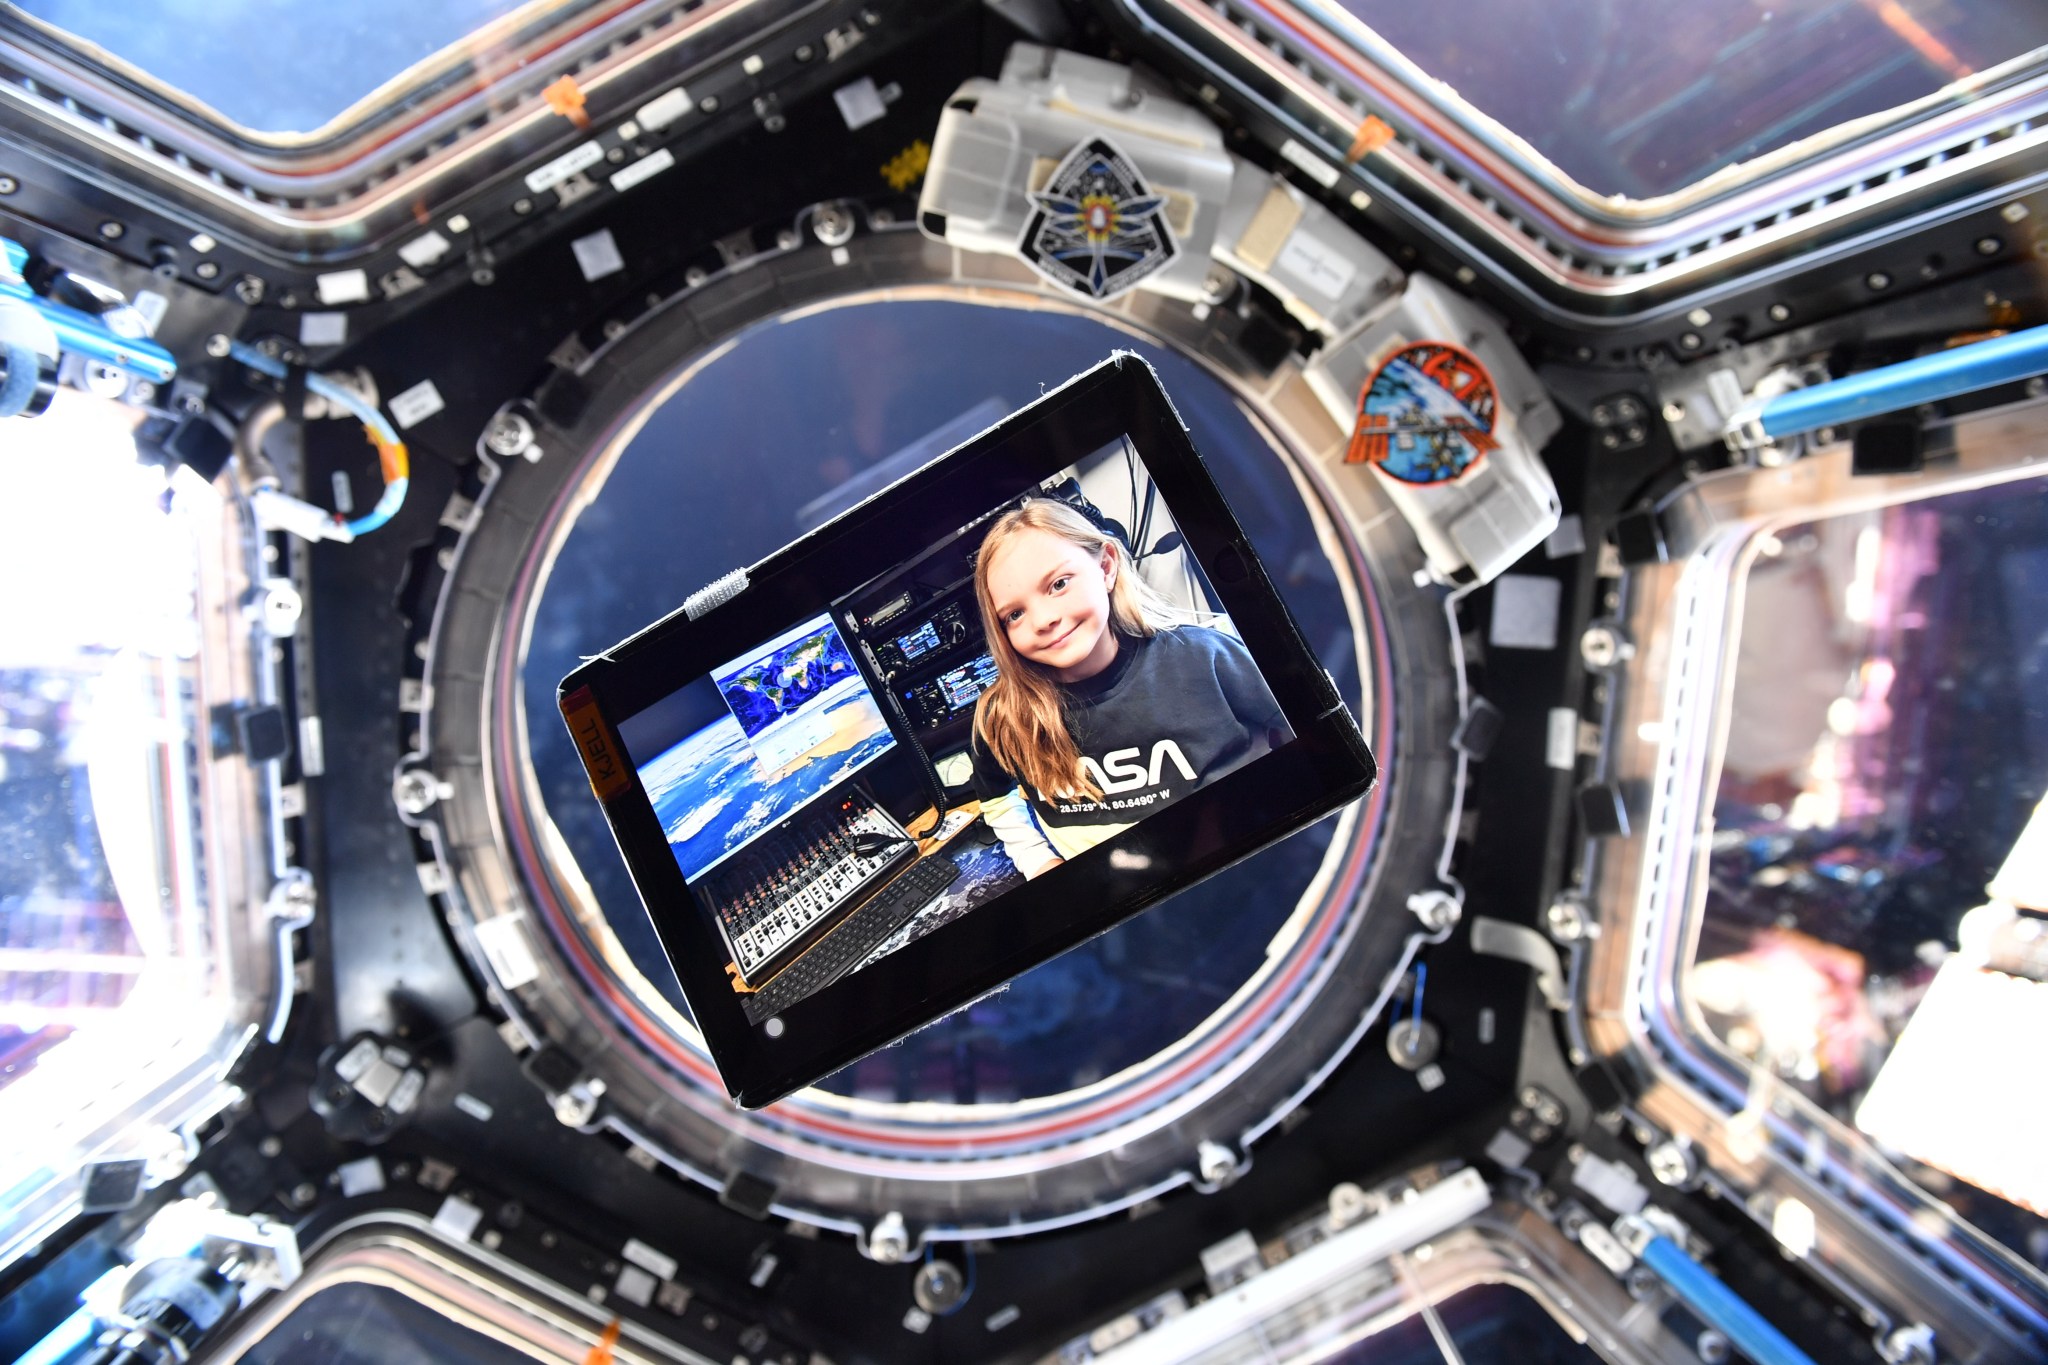 A tablet floats in the space station cupola, the screen displaying Isabella Payne in a NASA t-shirt next to a ham radio control panel and a computer showing the ISS track over the Earth. The cupola windows are behind the tablet.